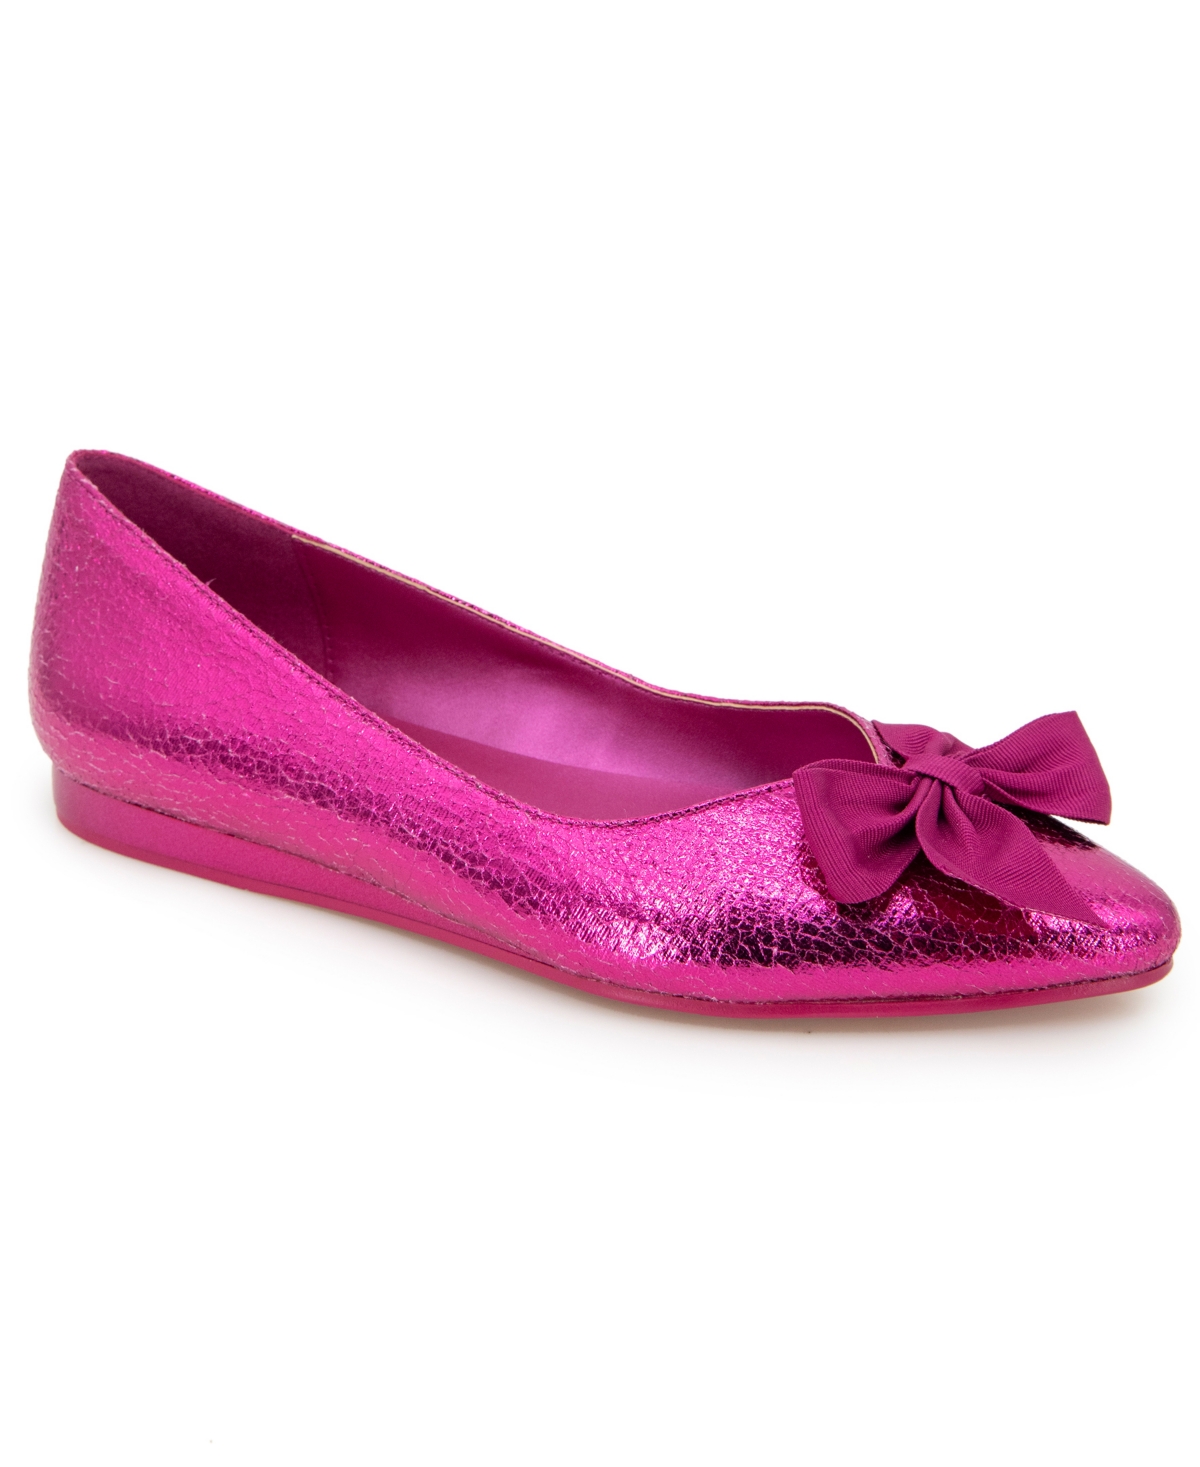 Women's Lily Bow Ballet Flats - Hot Pink